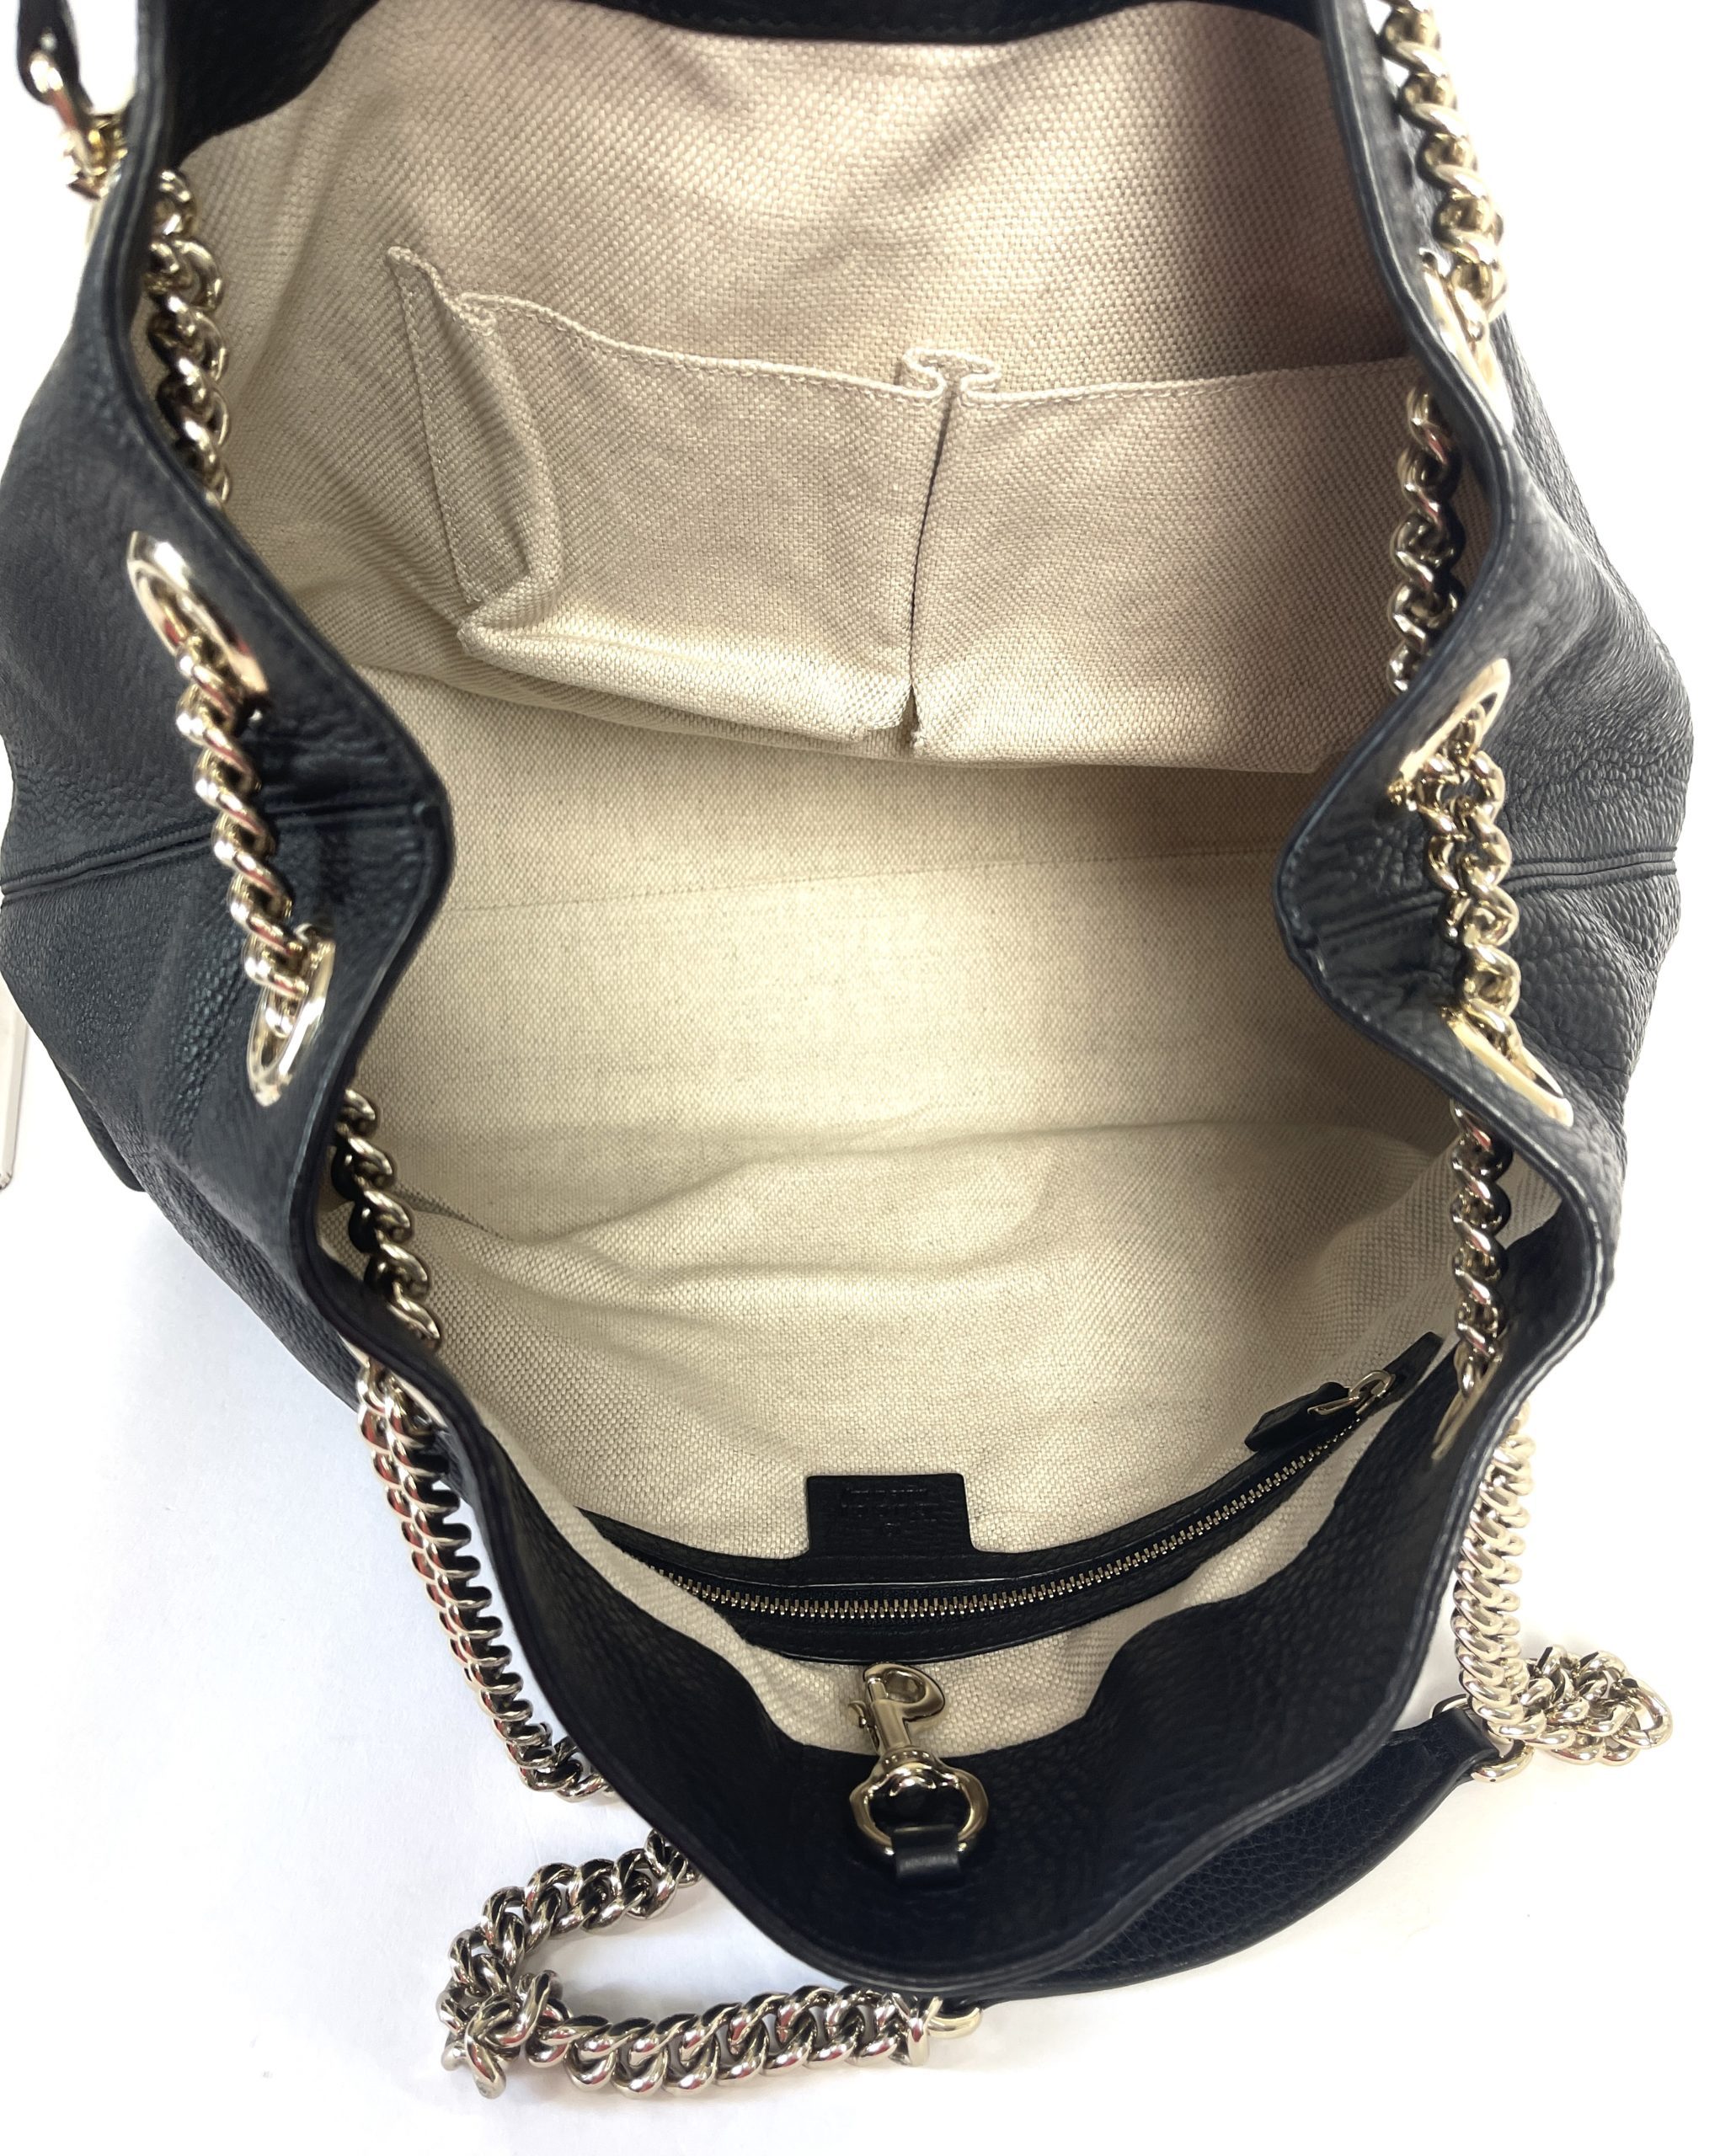 Gucci SOHO Hobo Bag in Black Leather With Gold Toned Hardware 